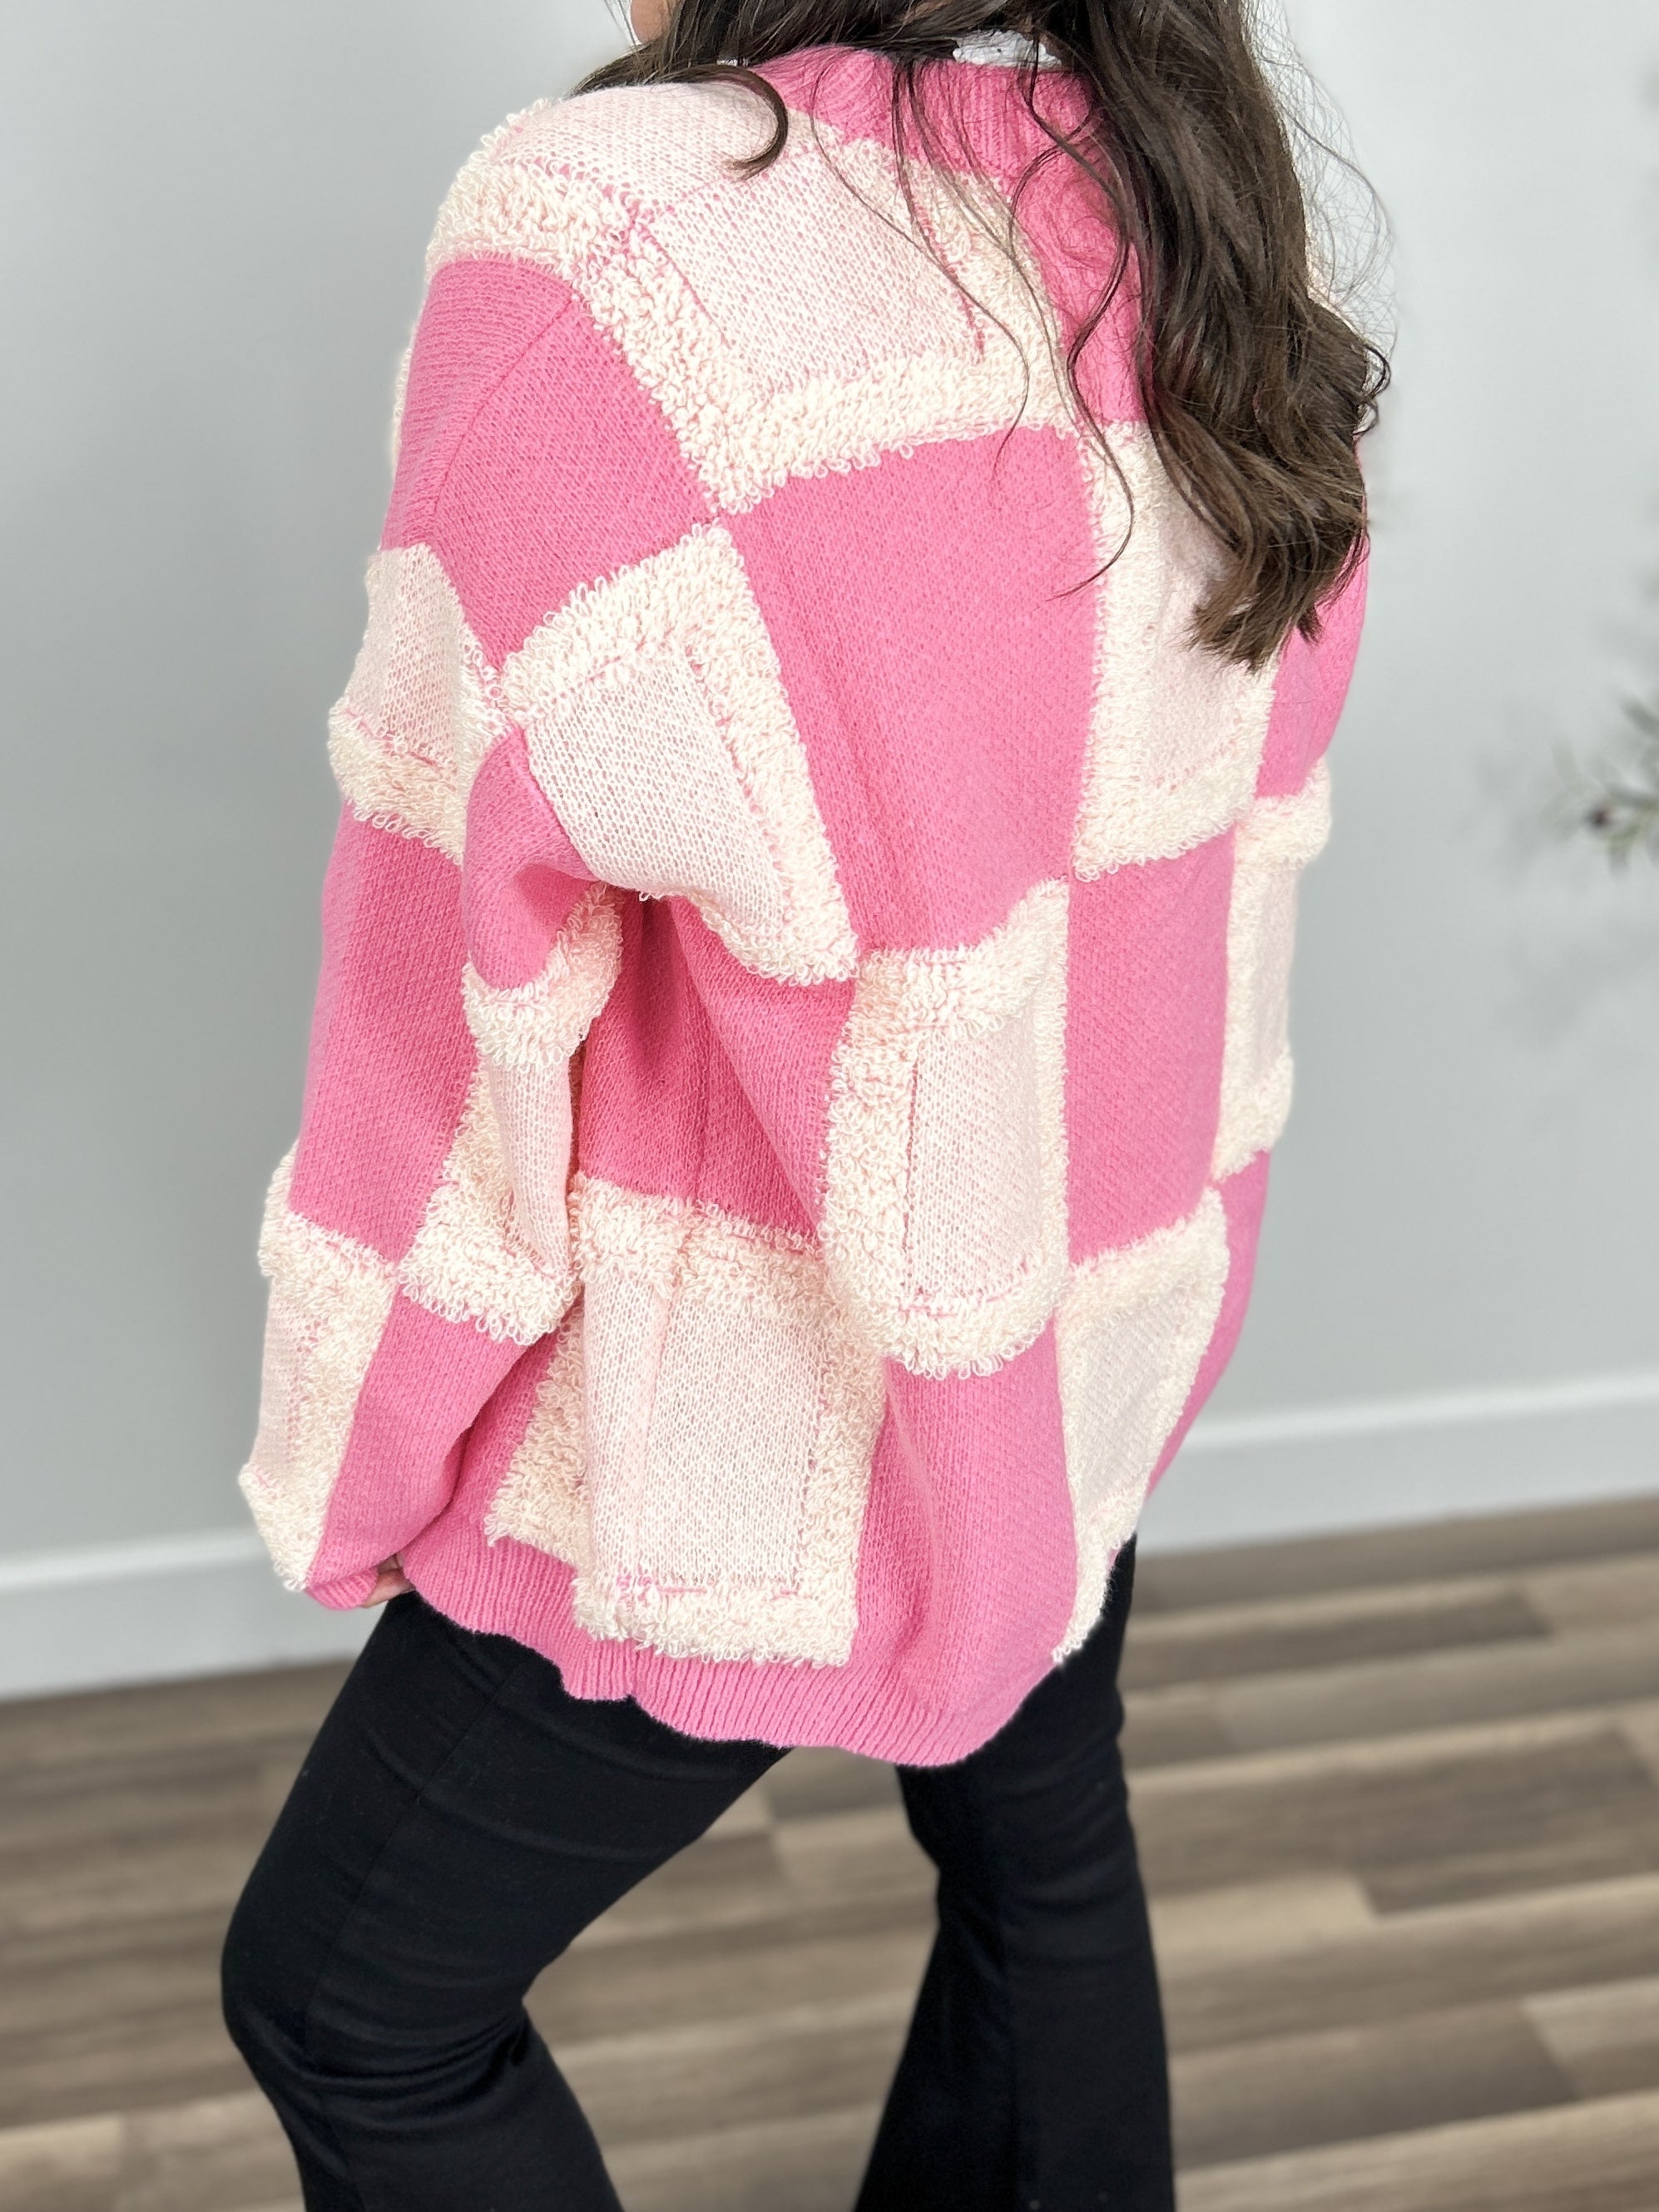 Checkered women's cozy cardigan back view of pink and ivory checkered pattern.